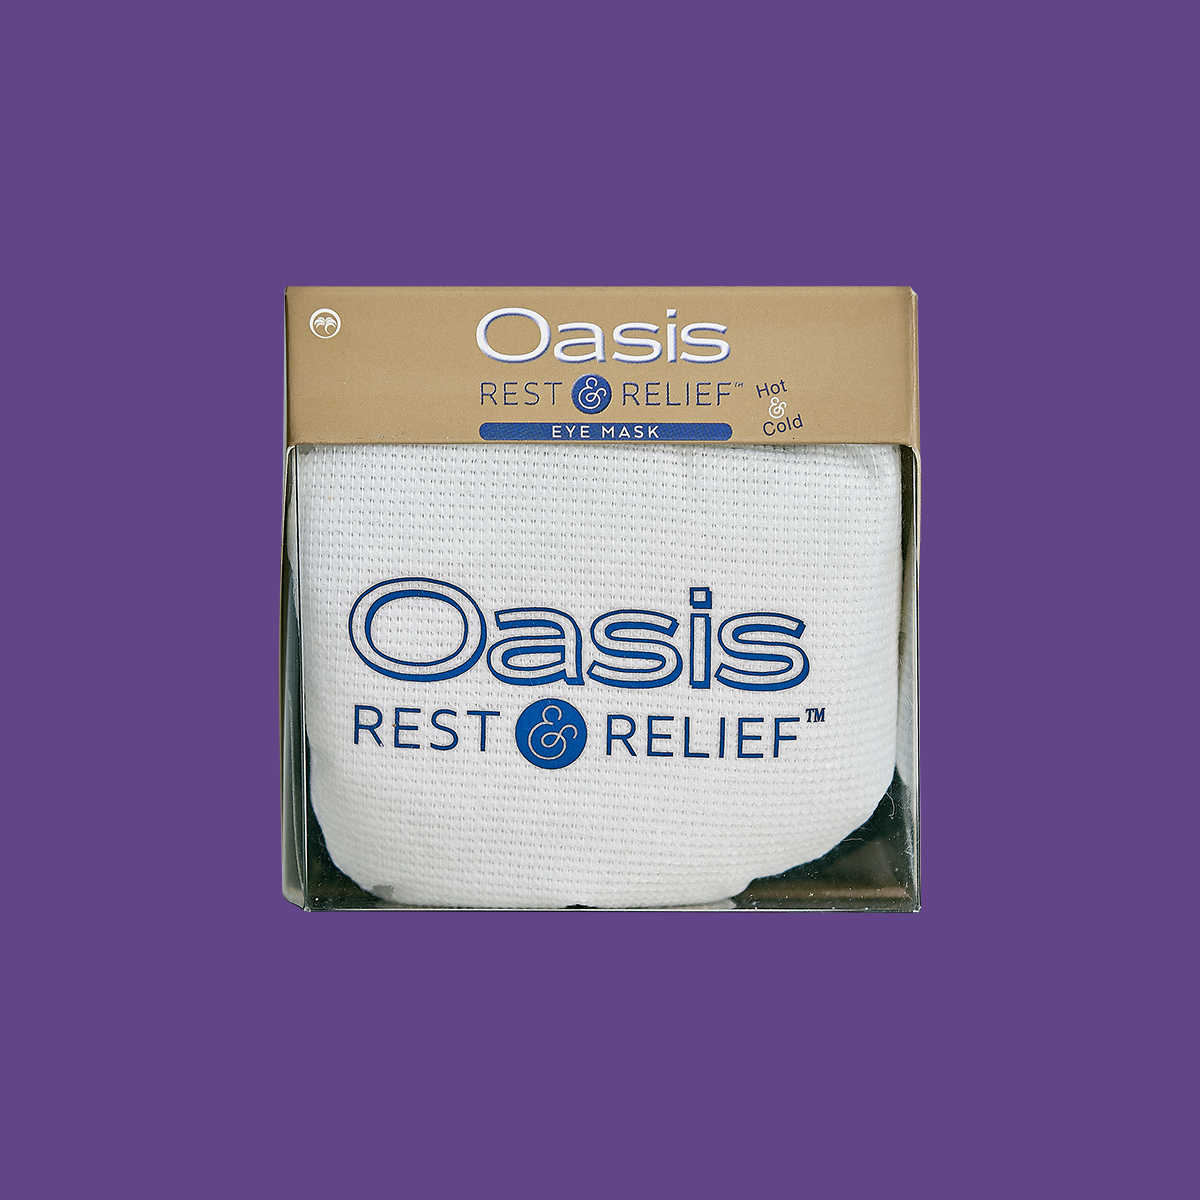 Oasis Hot & Cold Dry Eye & Allergy Mask